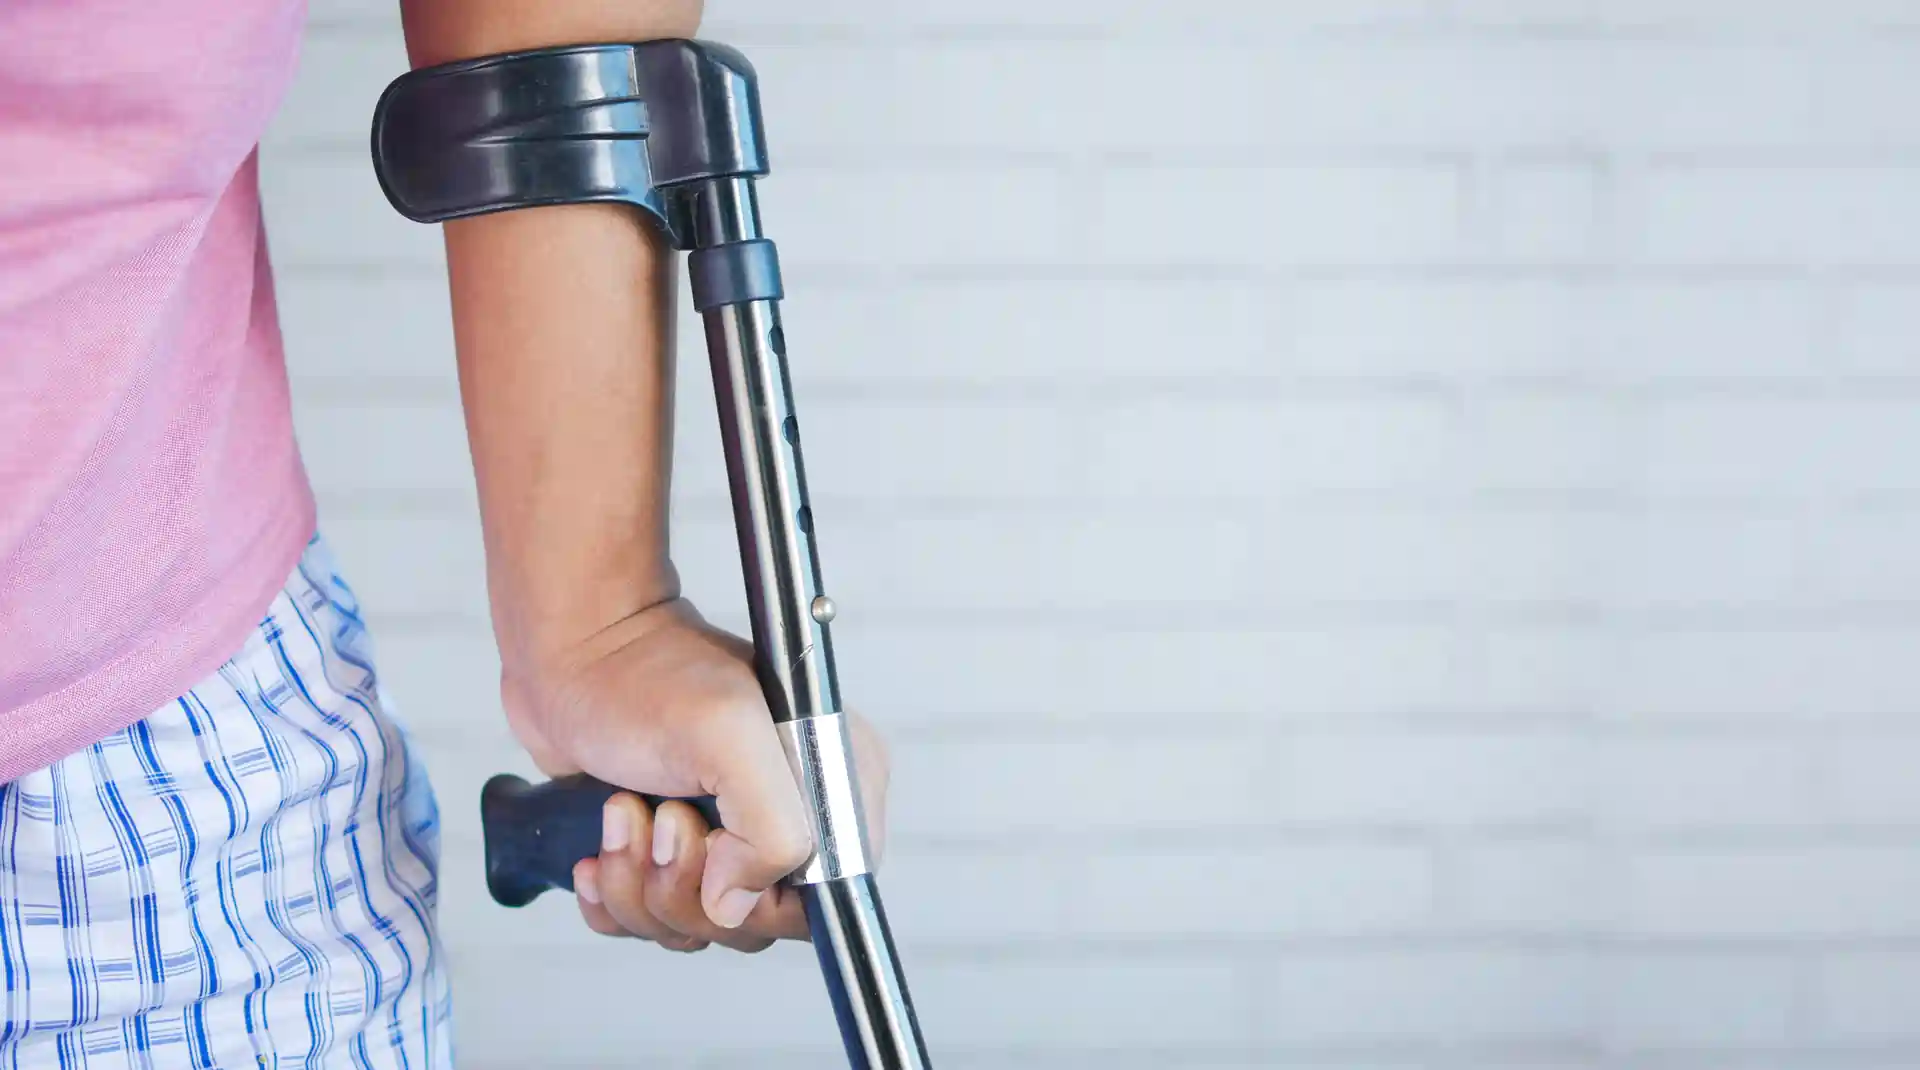 Close up of a person using crutches.